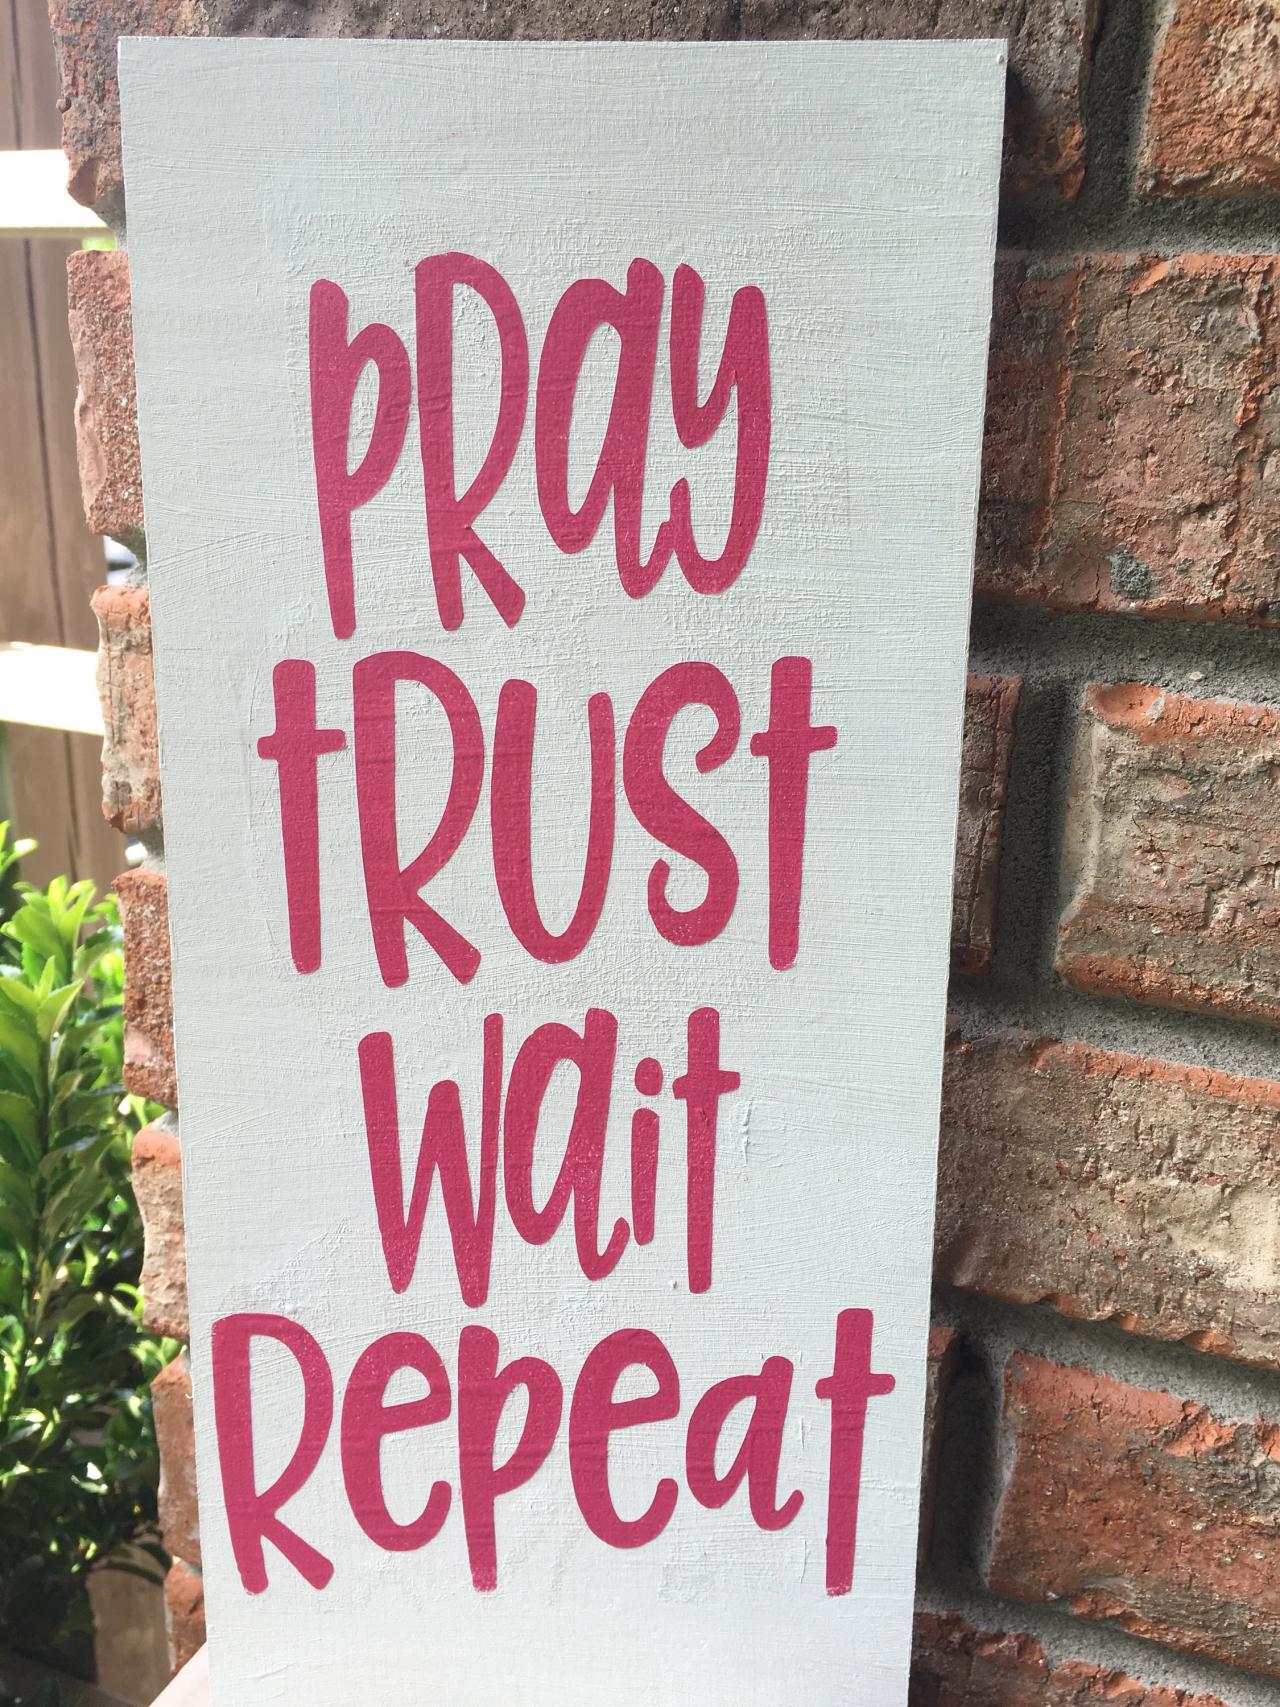 12x5 Pray, trust, wait, repeat Hand painted wood sign